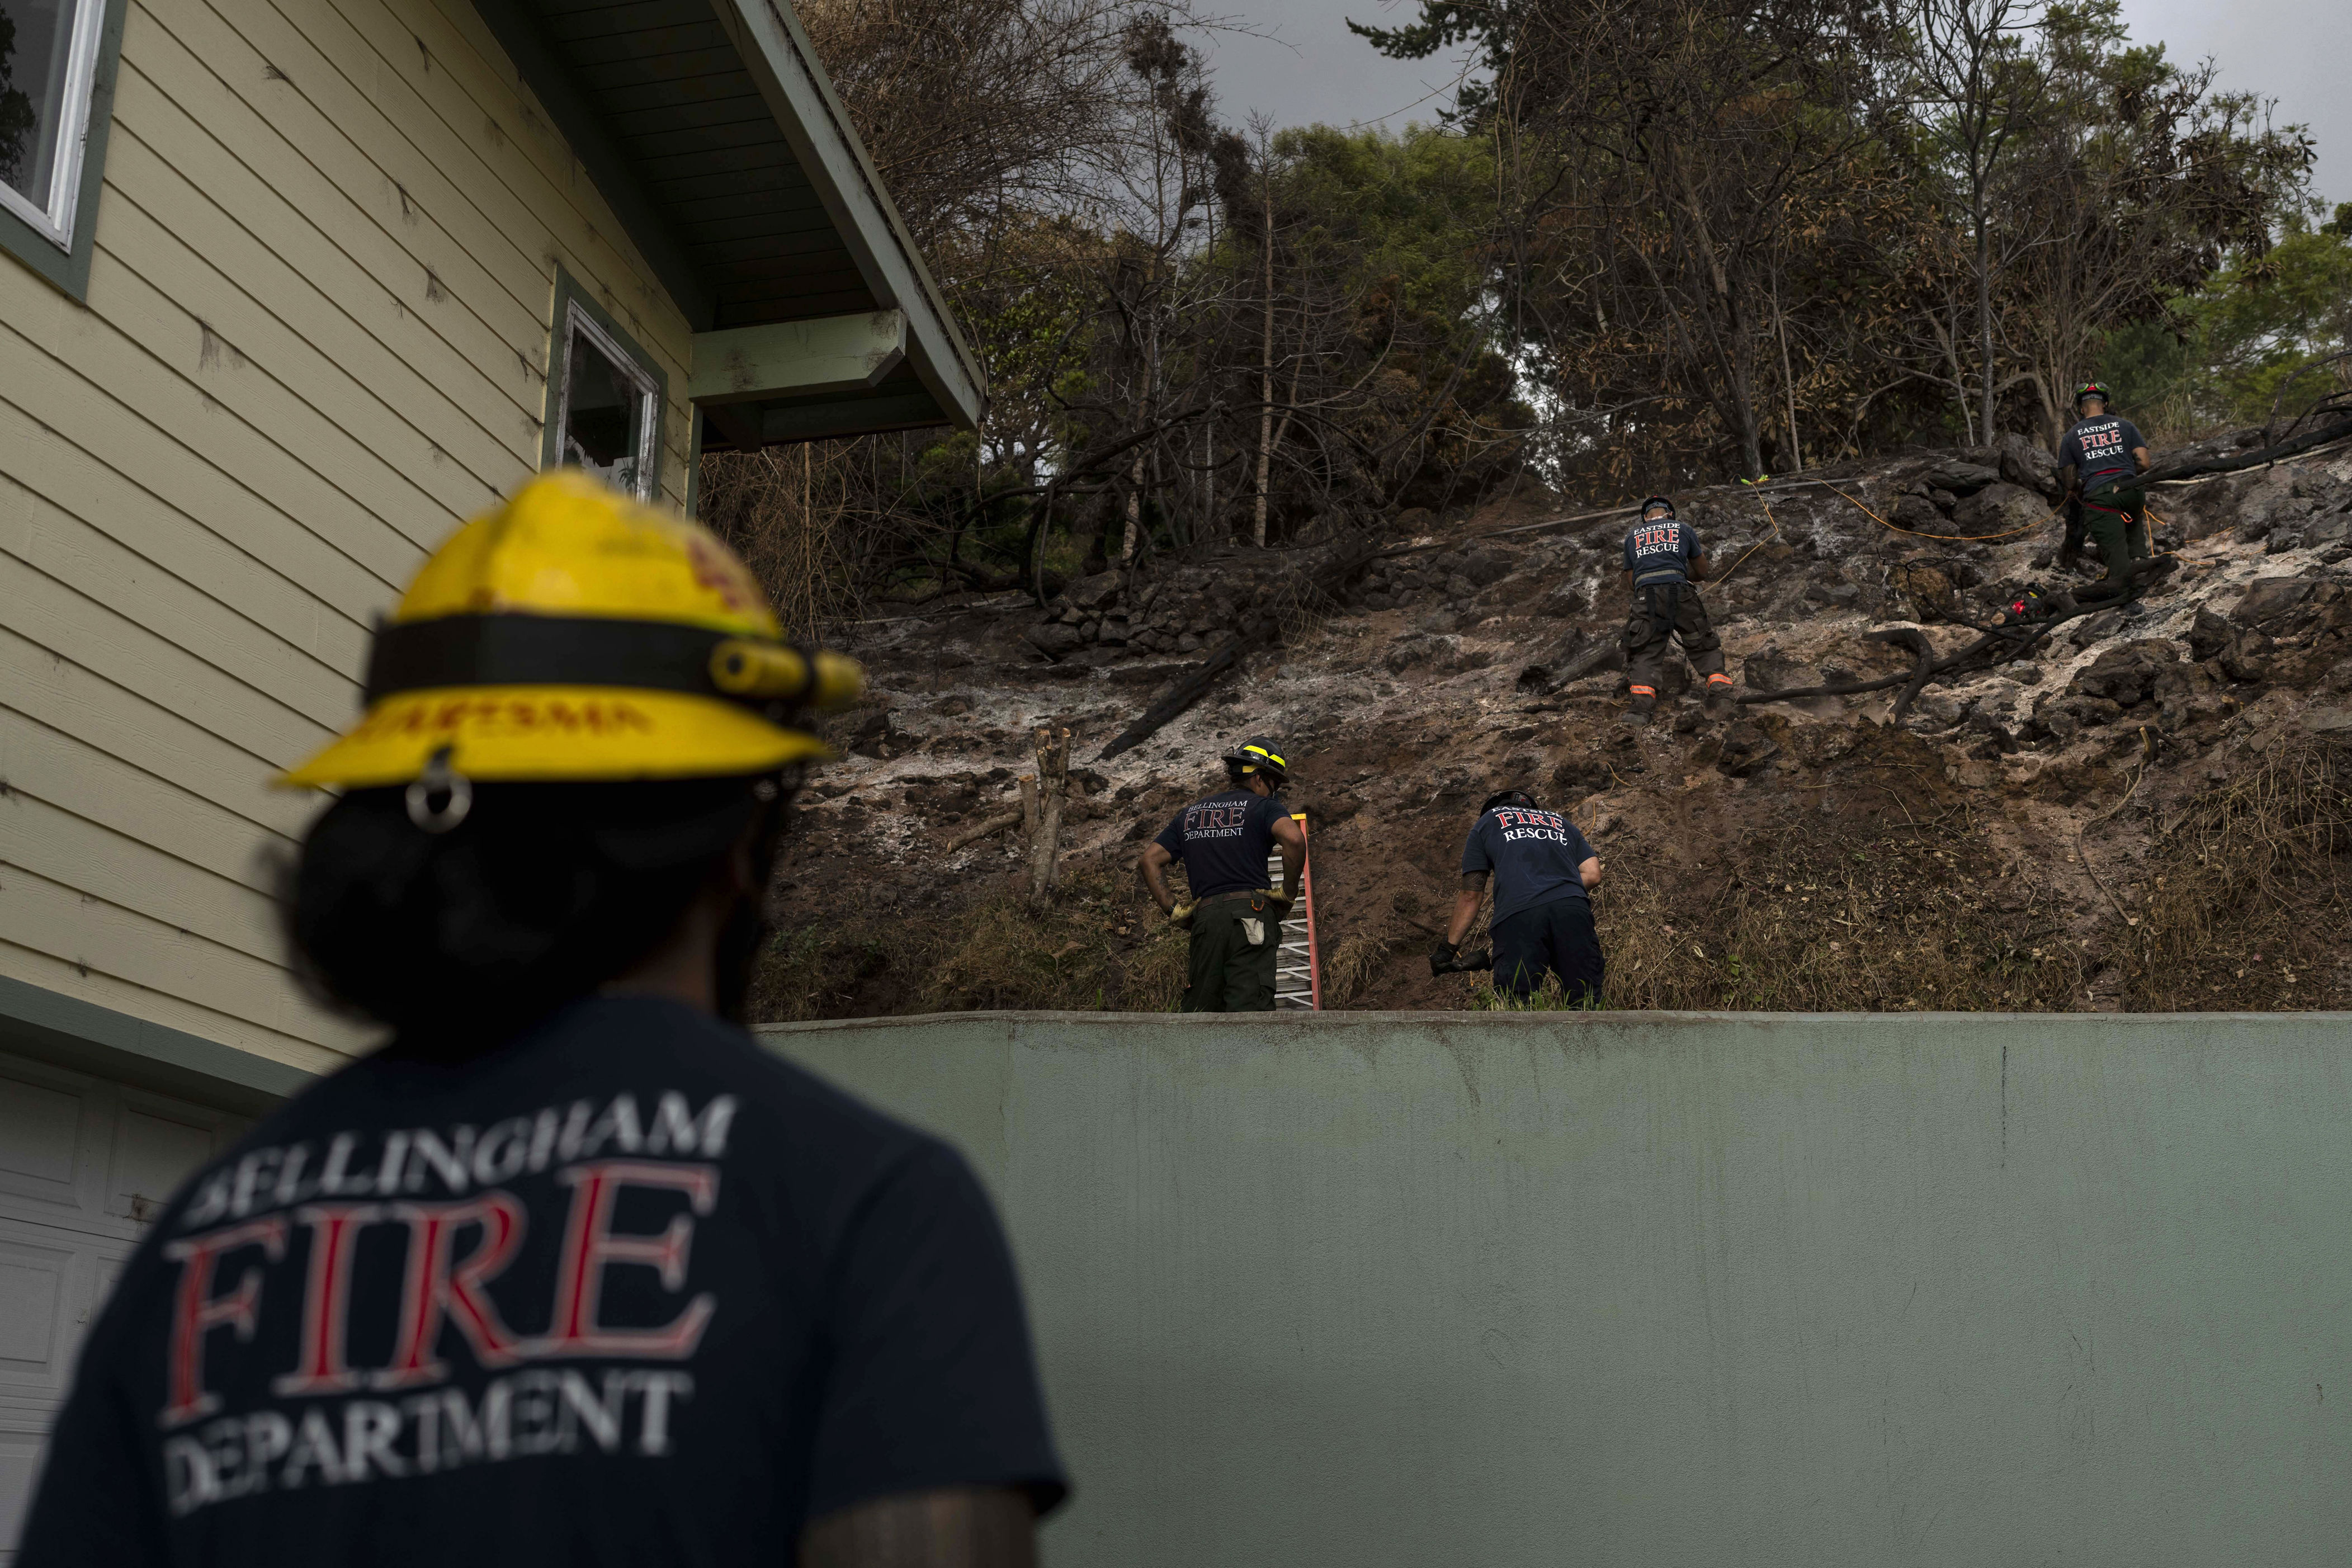 maui fire department to release after-action report on deadly hawaii wildfires